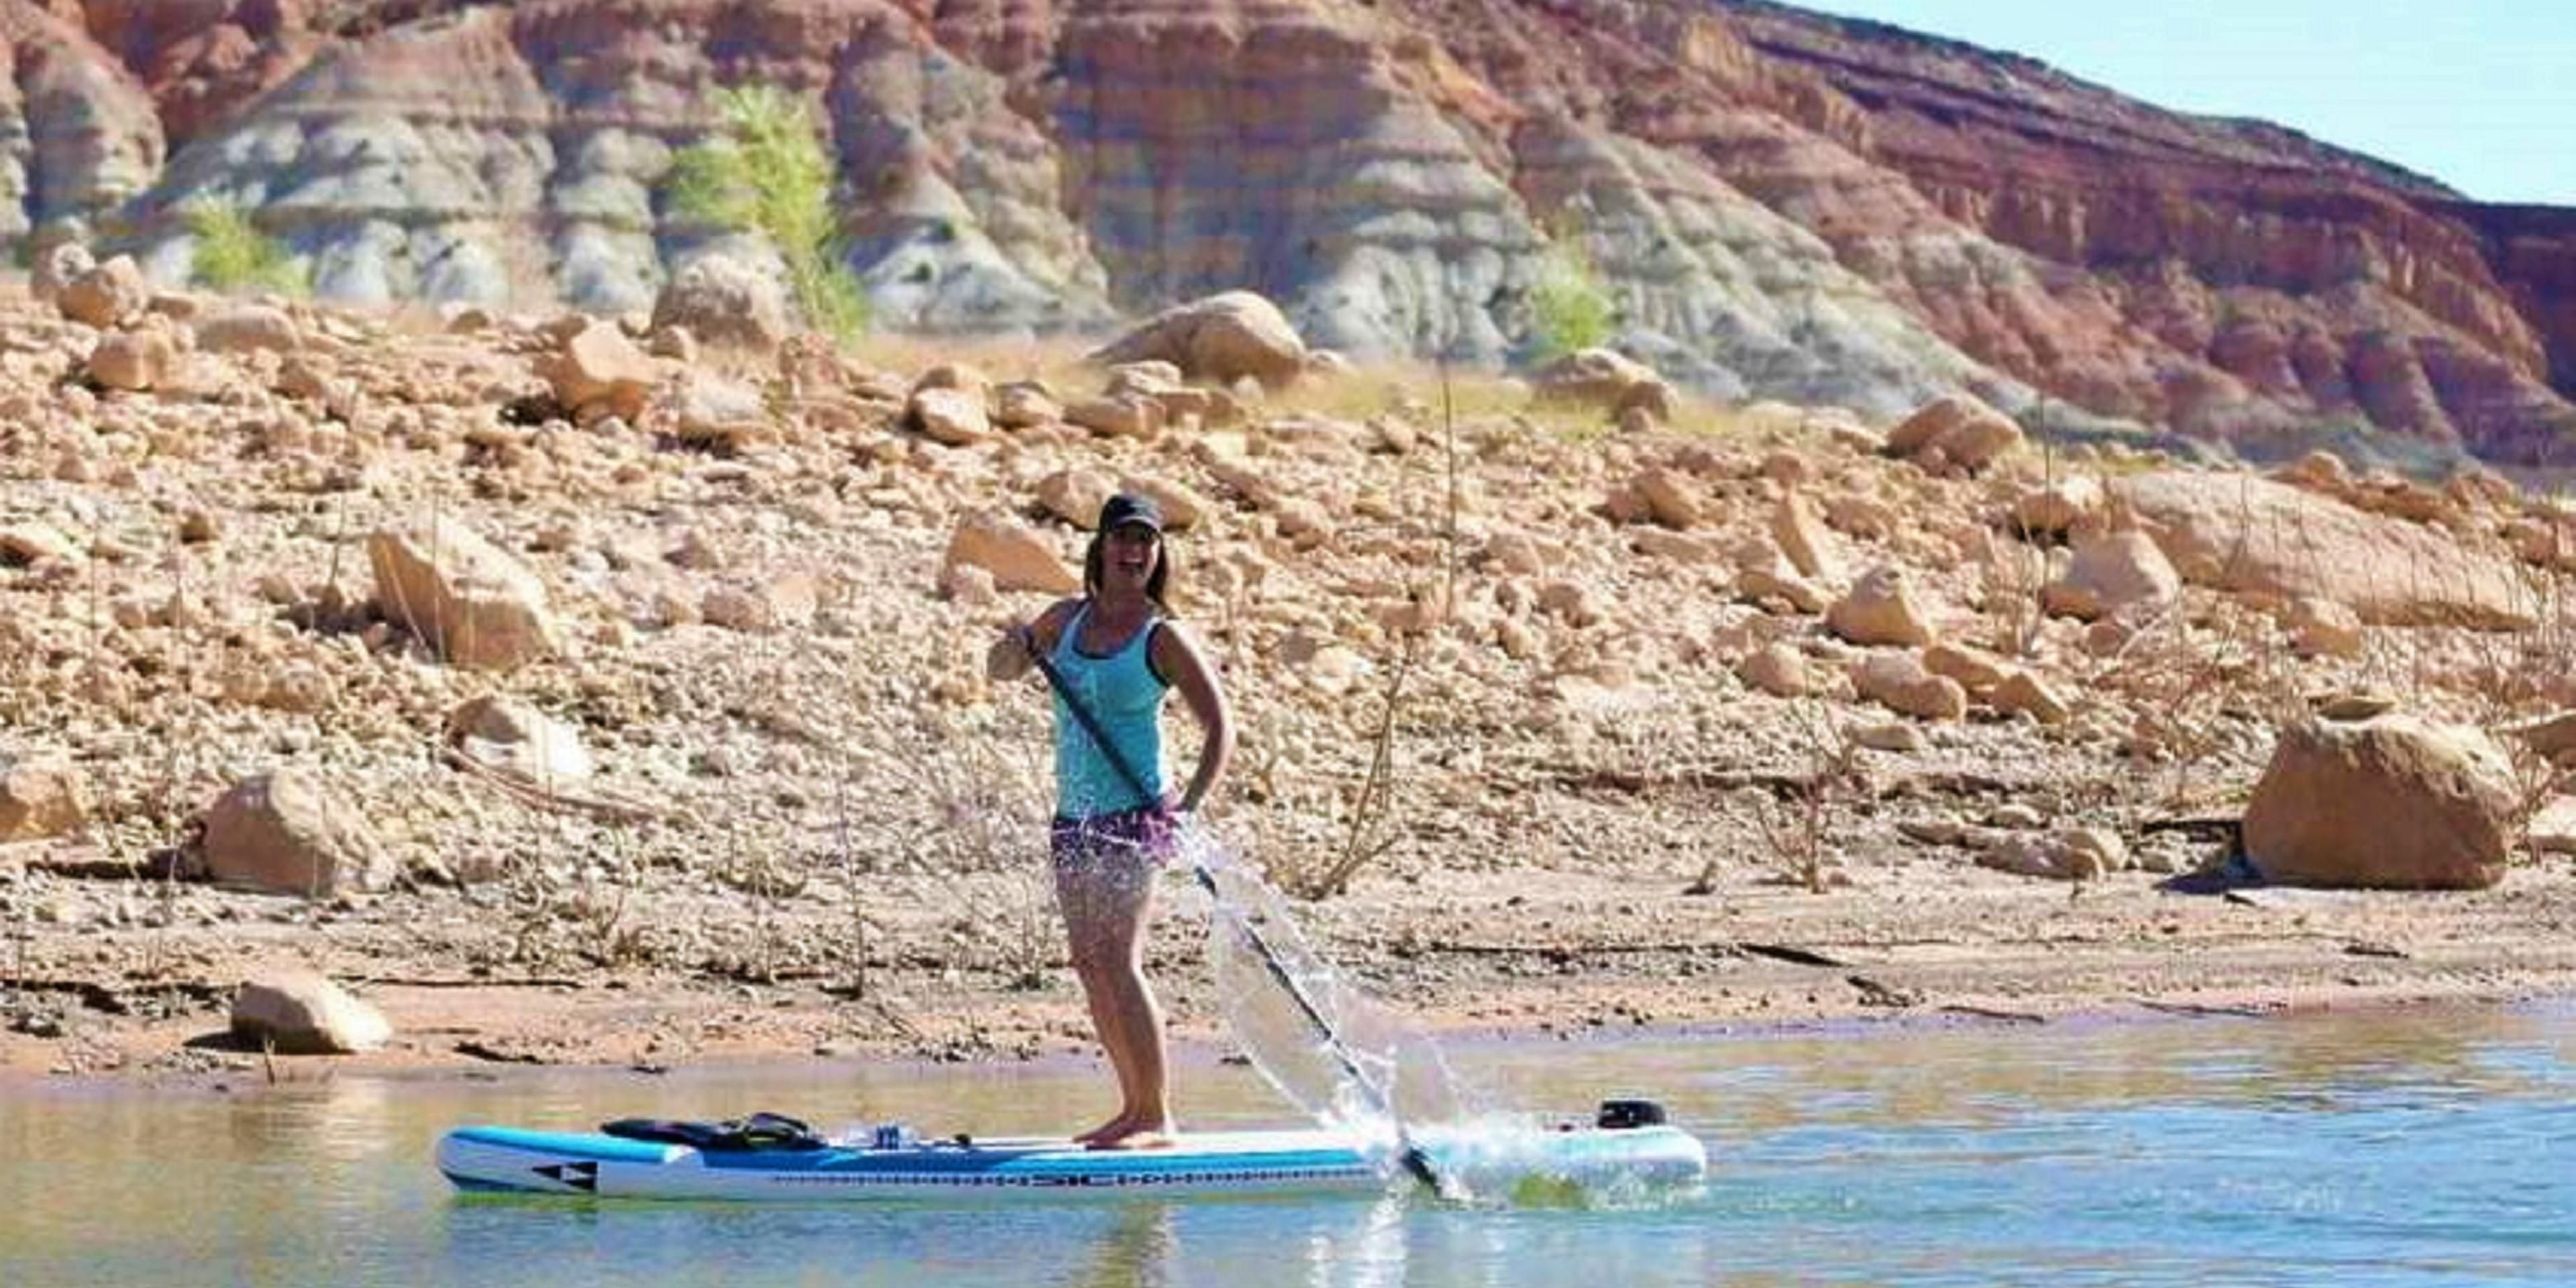 Boasting some of the warmest waters in Southern Utah, Quail Creek State Park is seven minutes from Holiday Inn Express & Suites St. George North - Zion. Enjoy paddle boarding, kayaking, fishing and more. Come enjoy the great outdoors!